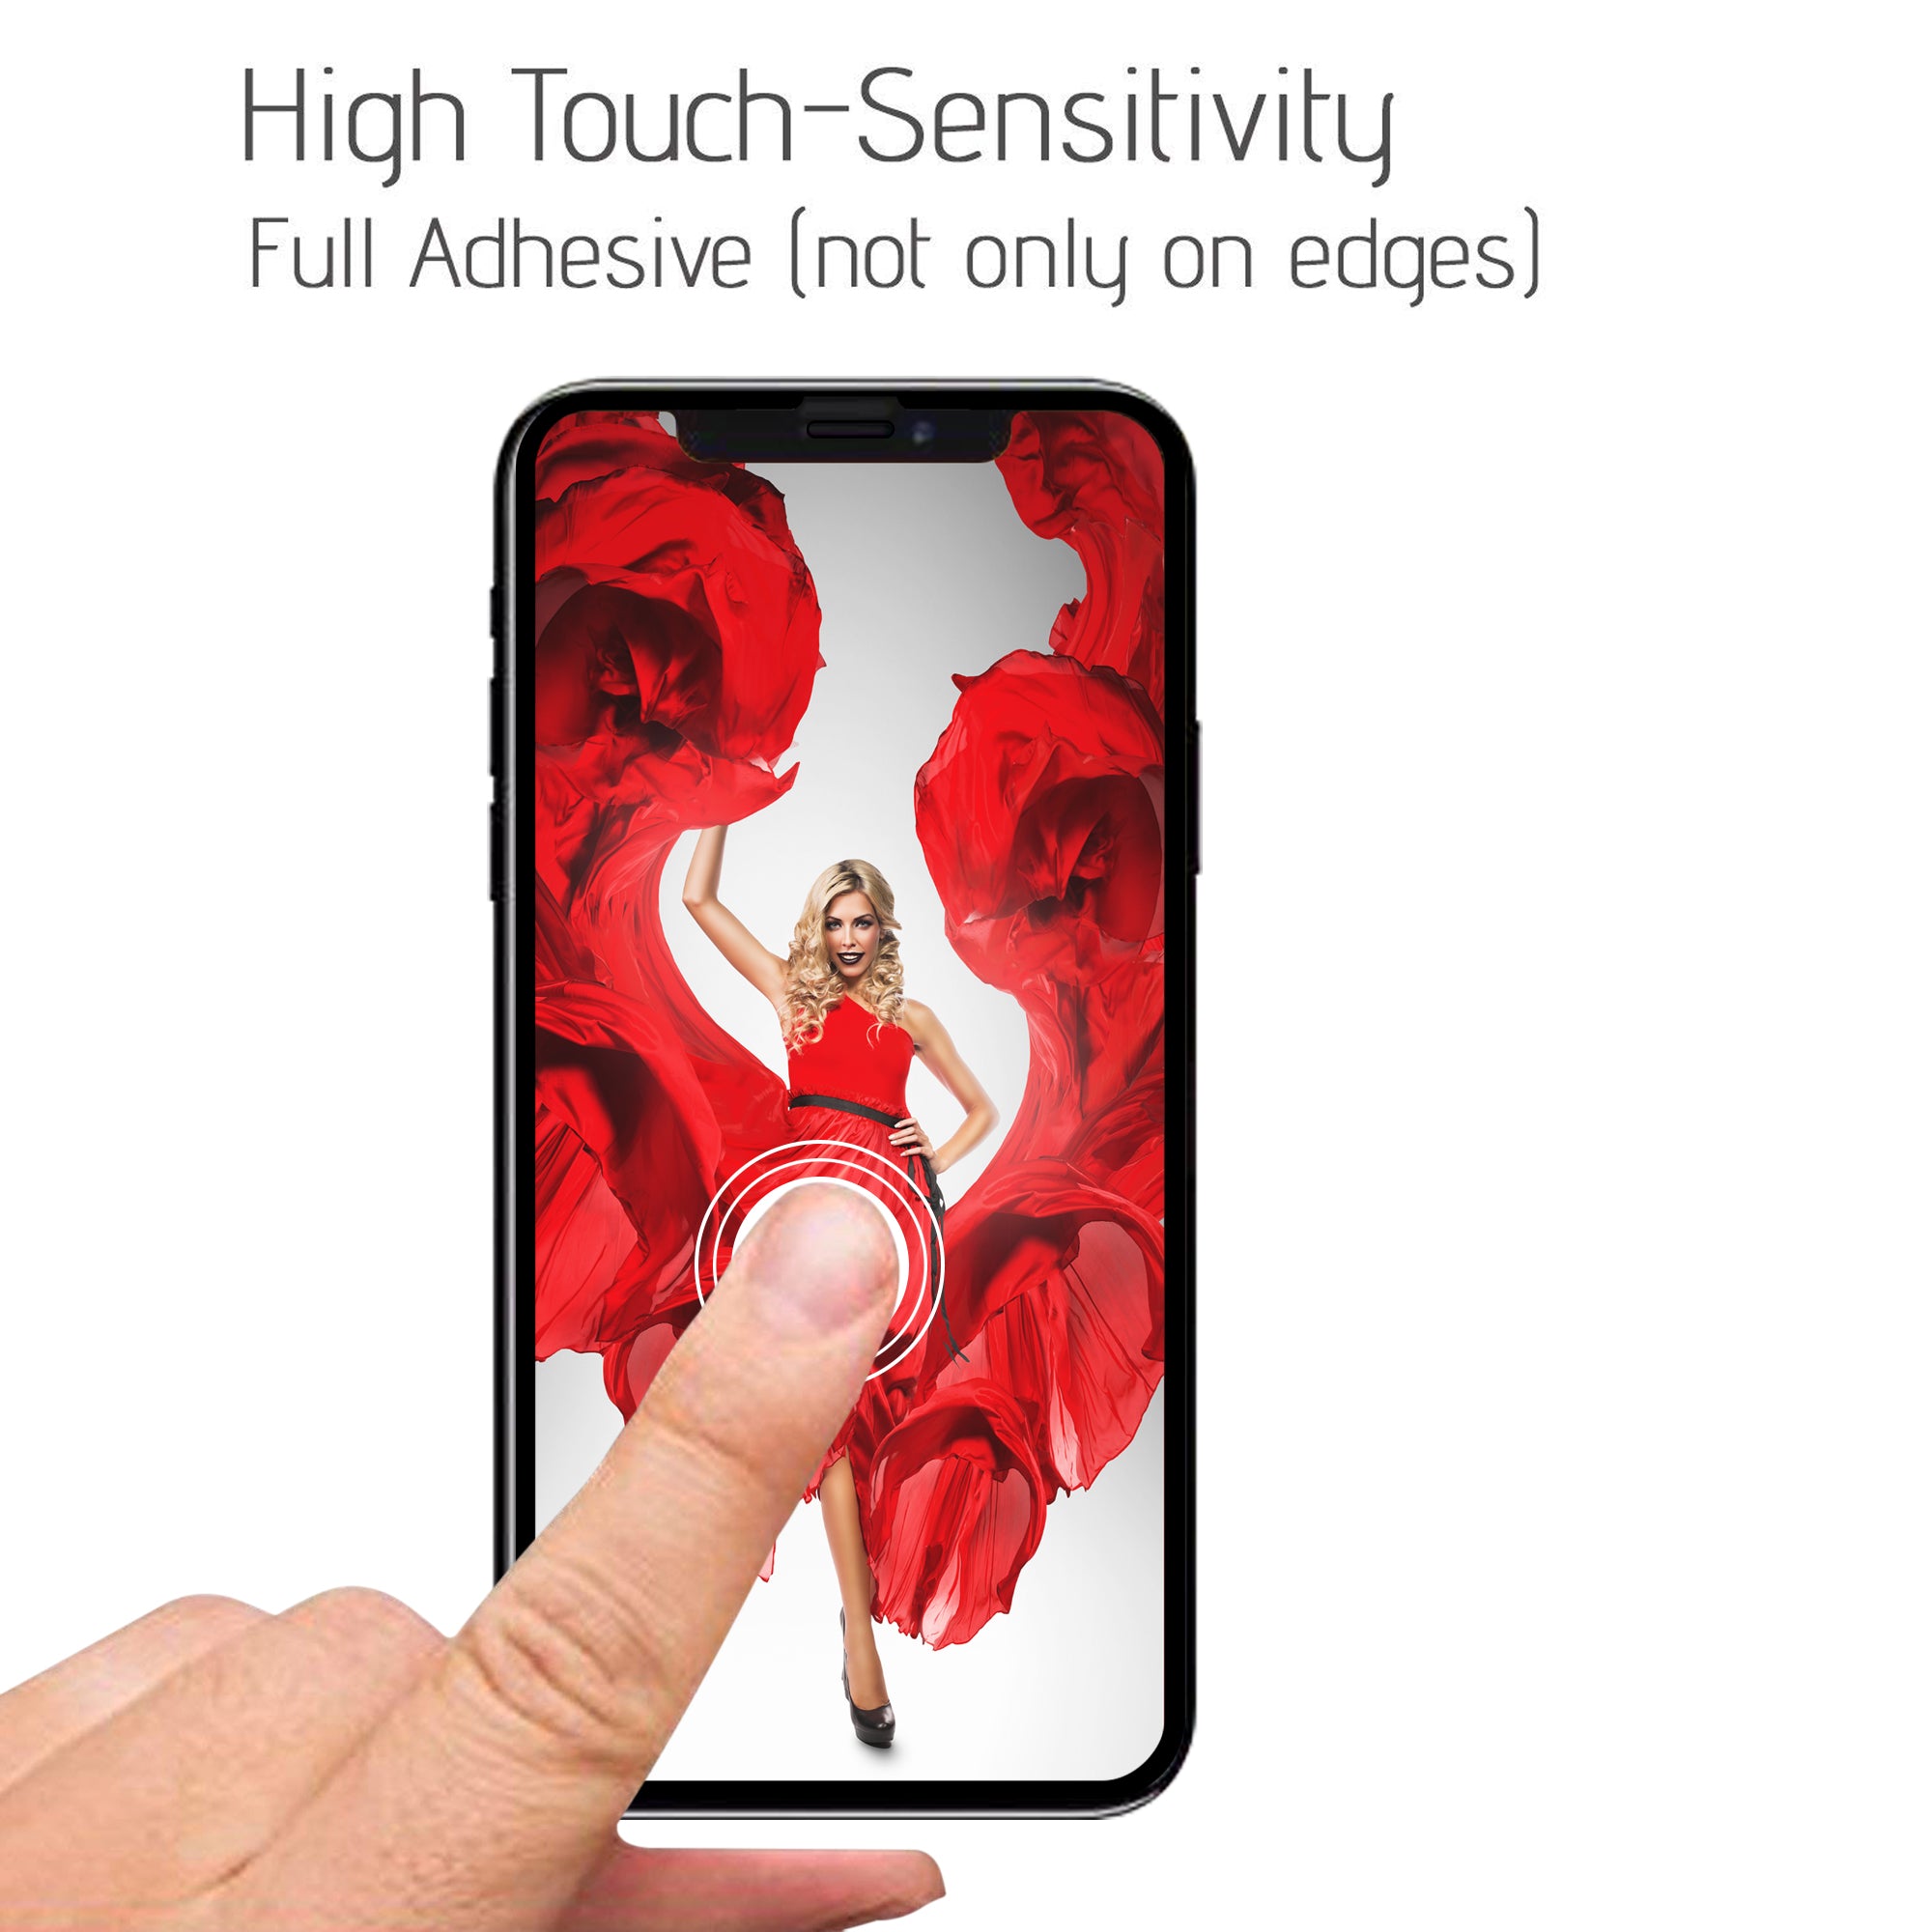 Luvvitt Tempered Glass for iPhone XS Max 6.5 inch Screen 2018